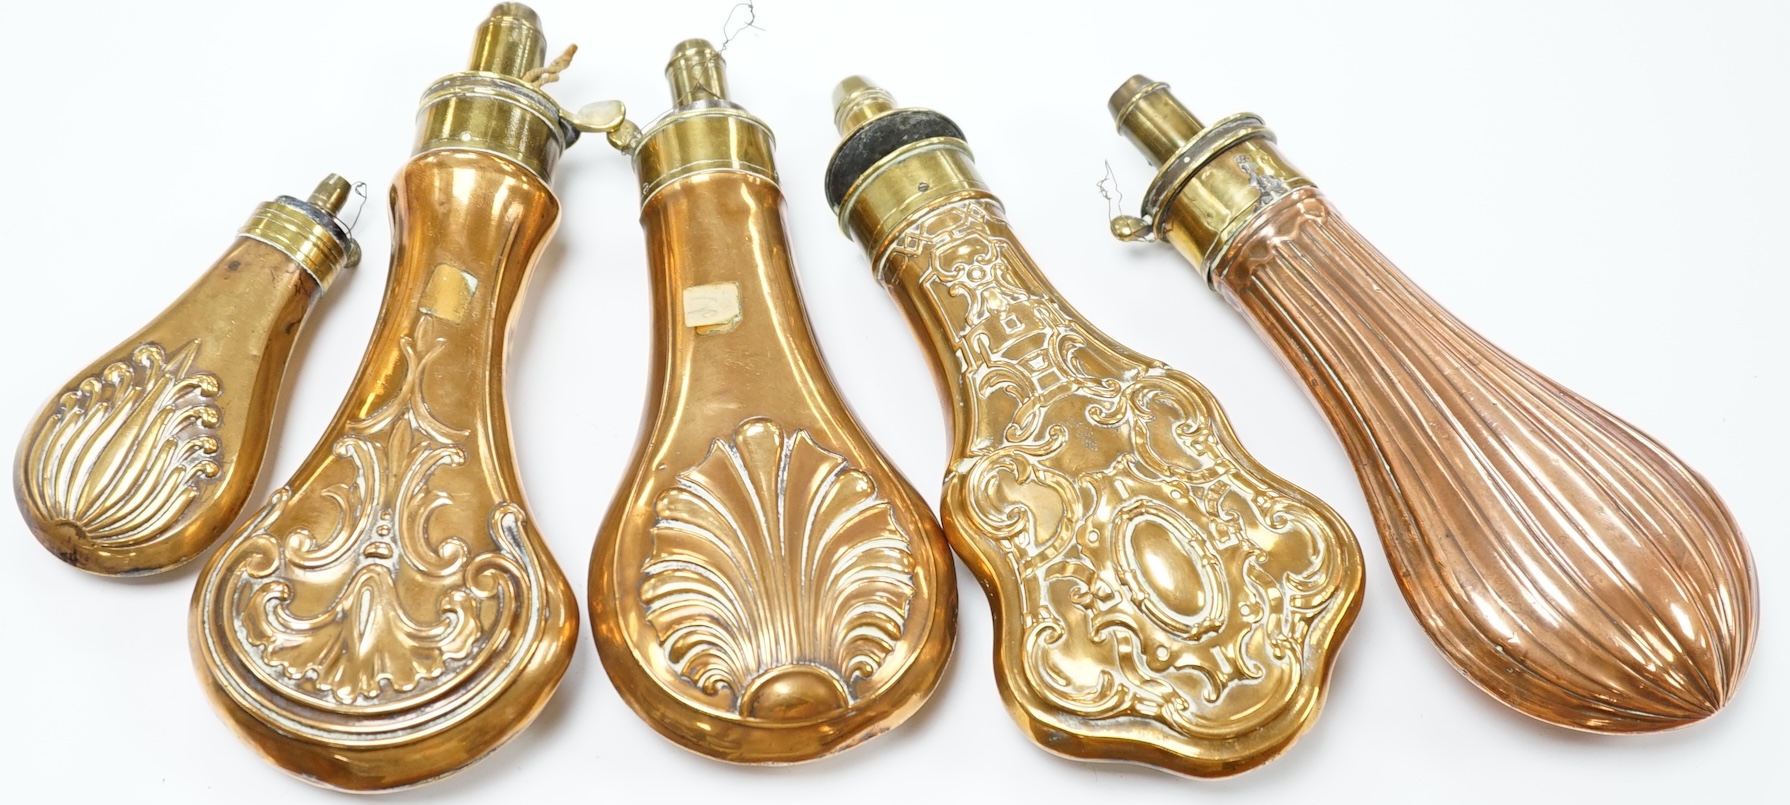 Five 19th century copper and brass powder flasks, all with embossed decoration to the bodies. Condition - fair